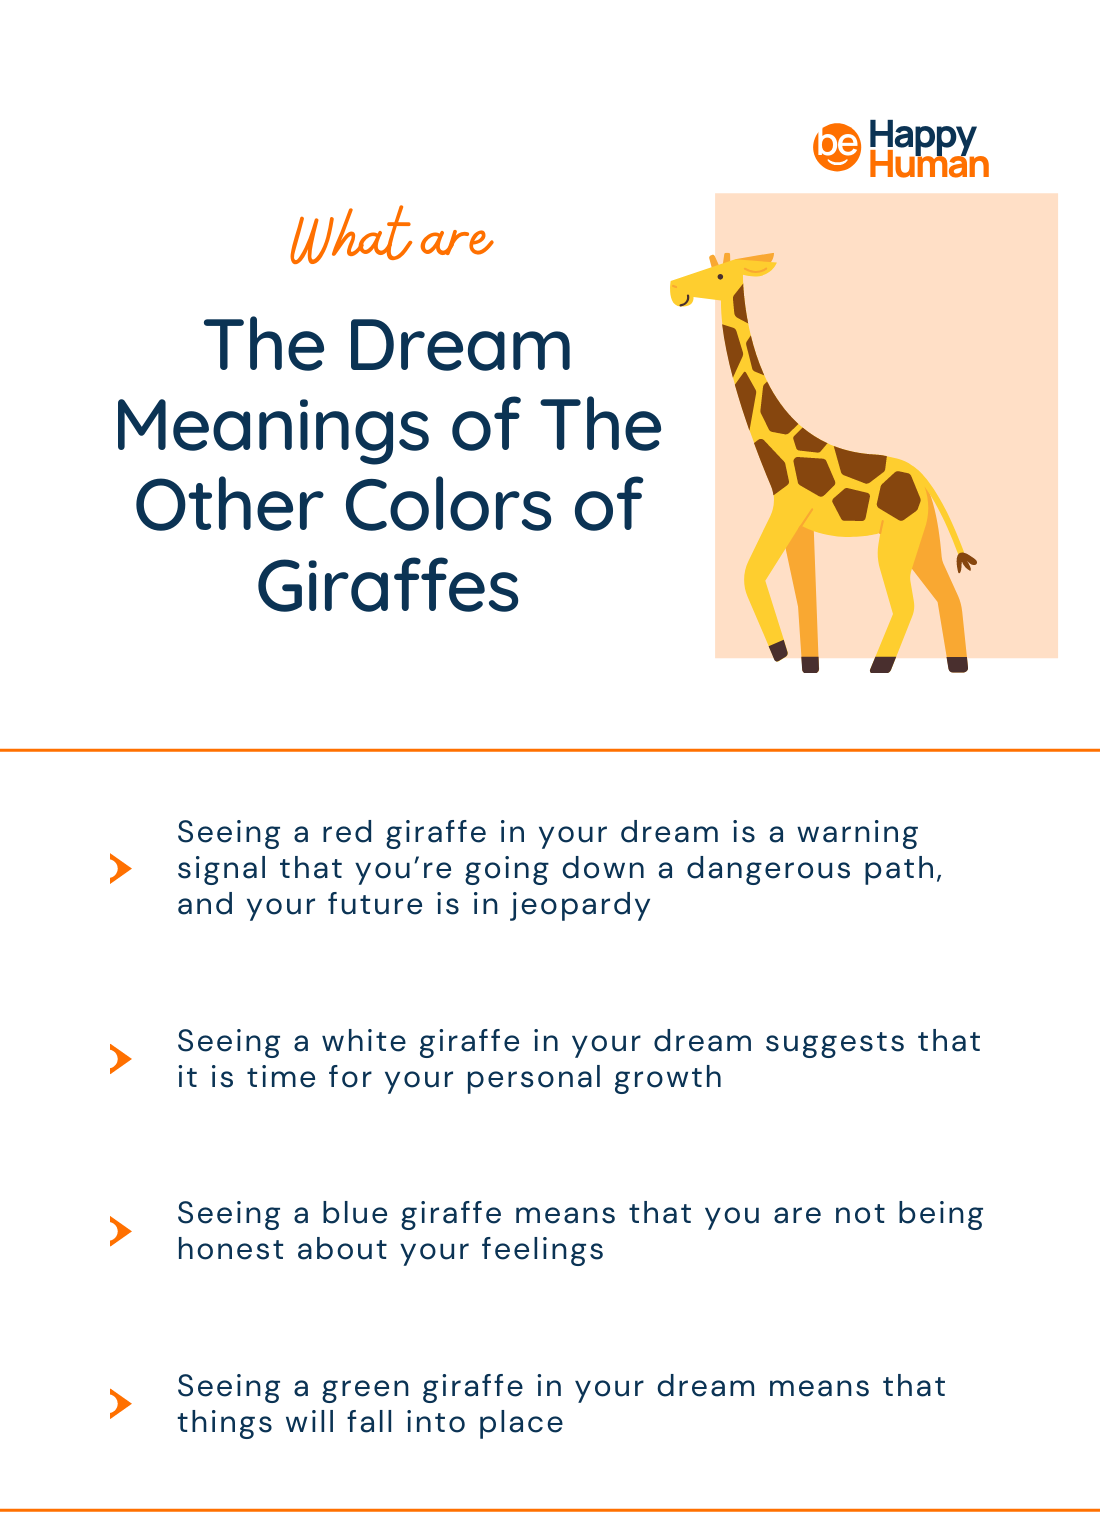 What Is The Meaning Of A Giraffe In Dreams In Different Cultures?